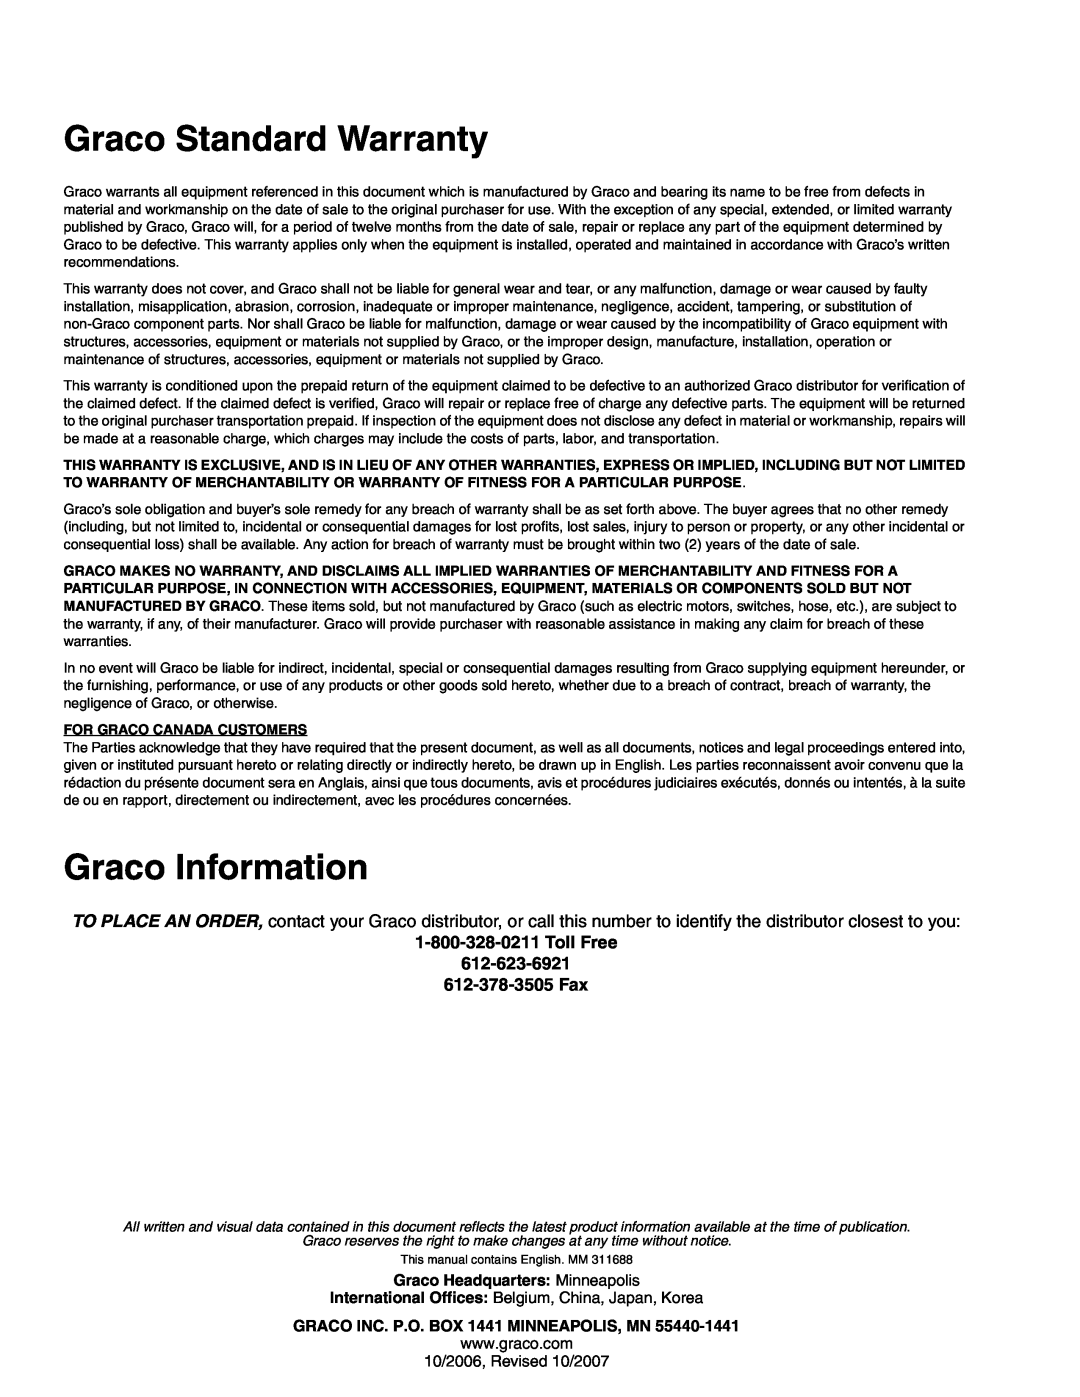 Graco 3D150 important safety instructions Graco Standard Warranty, Graco Information, Graco Headquarters Minneapolis 